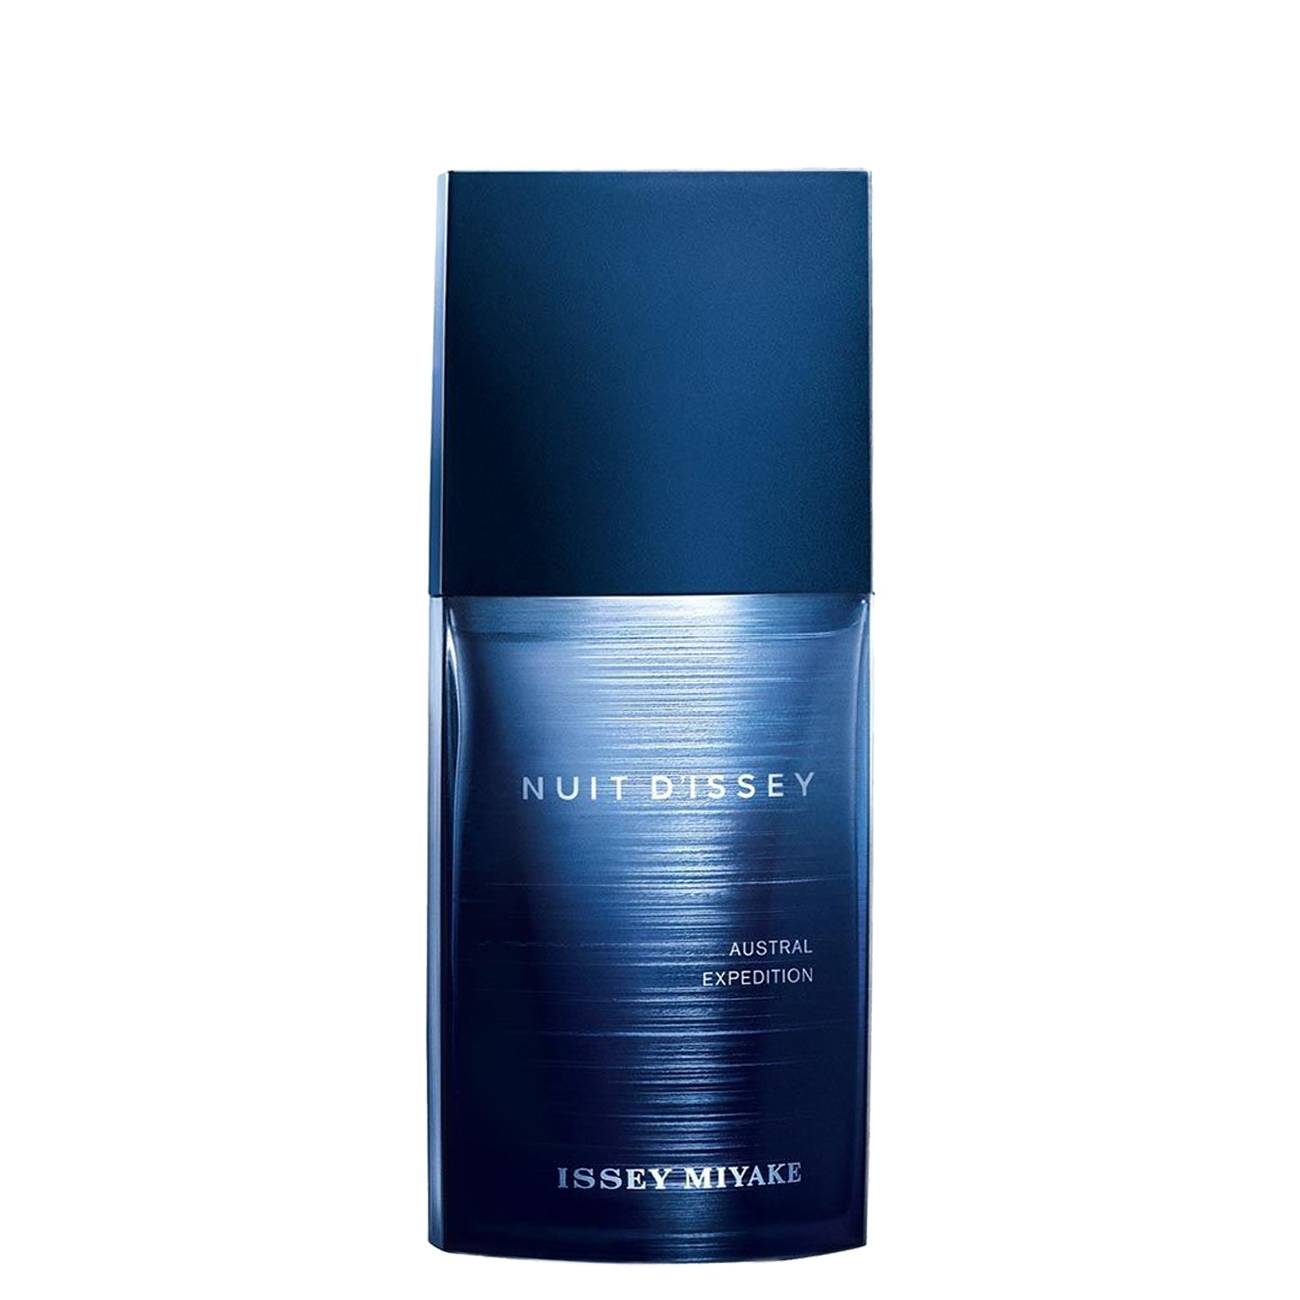 NUIT D’ISSEY AUSTRAL EXPEDITION 125 ml 125